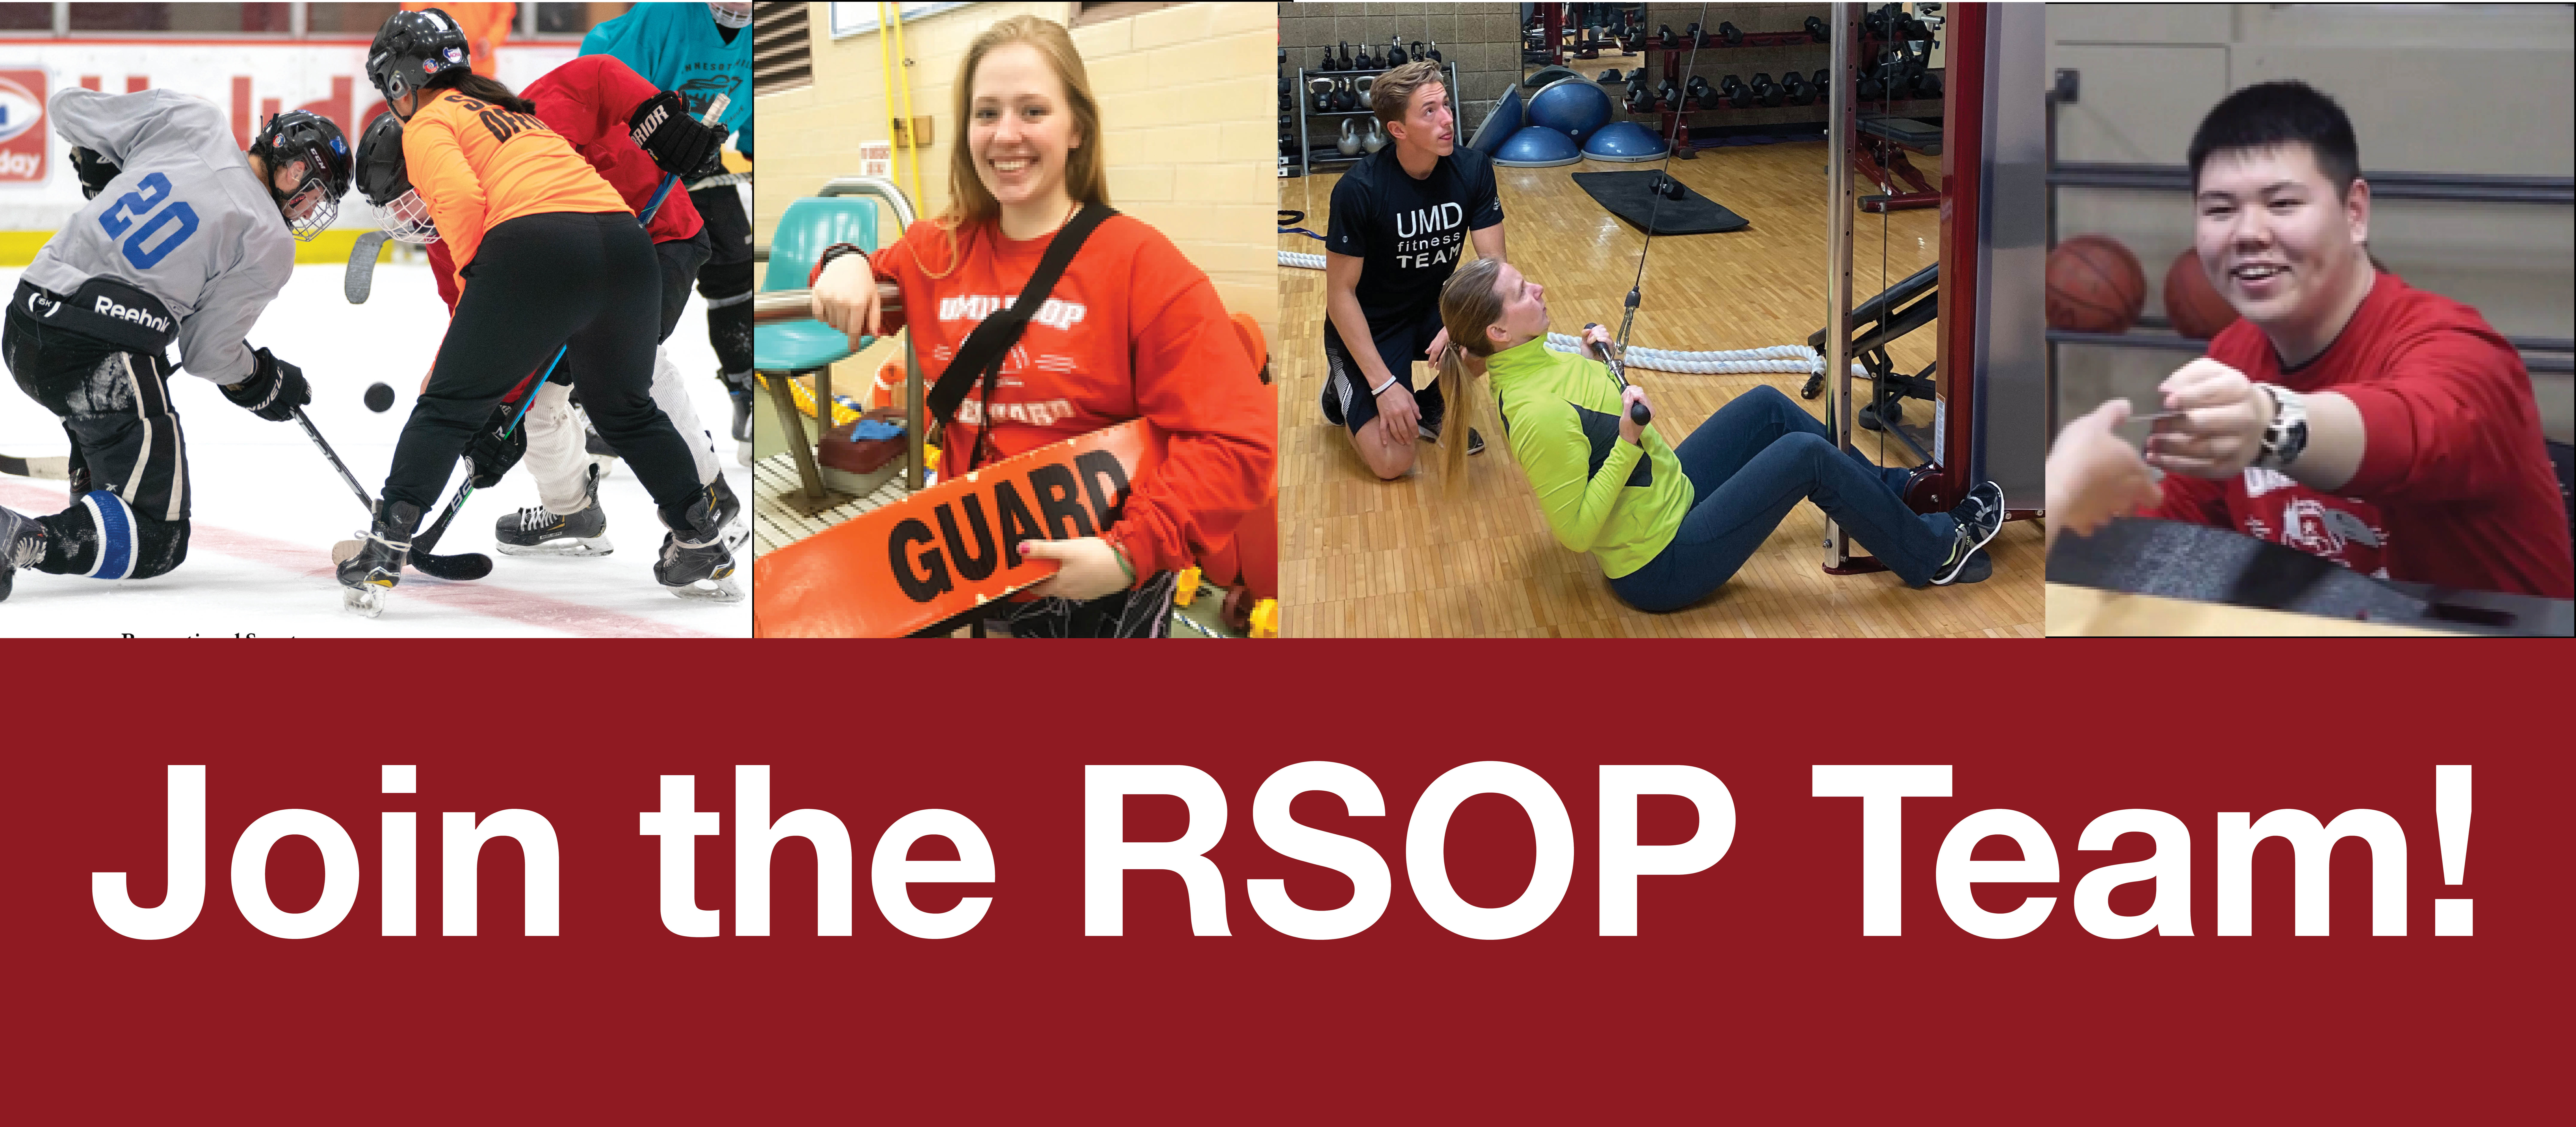 Join the RSOP team! Student workers hockey ref, lifeguard, personal trainer, rec center staff.